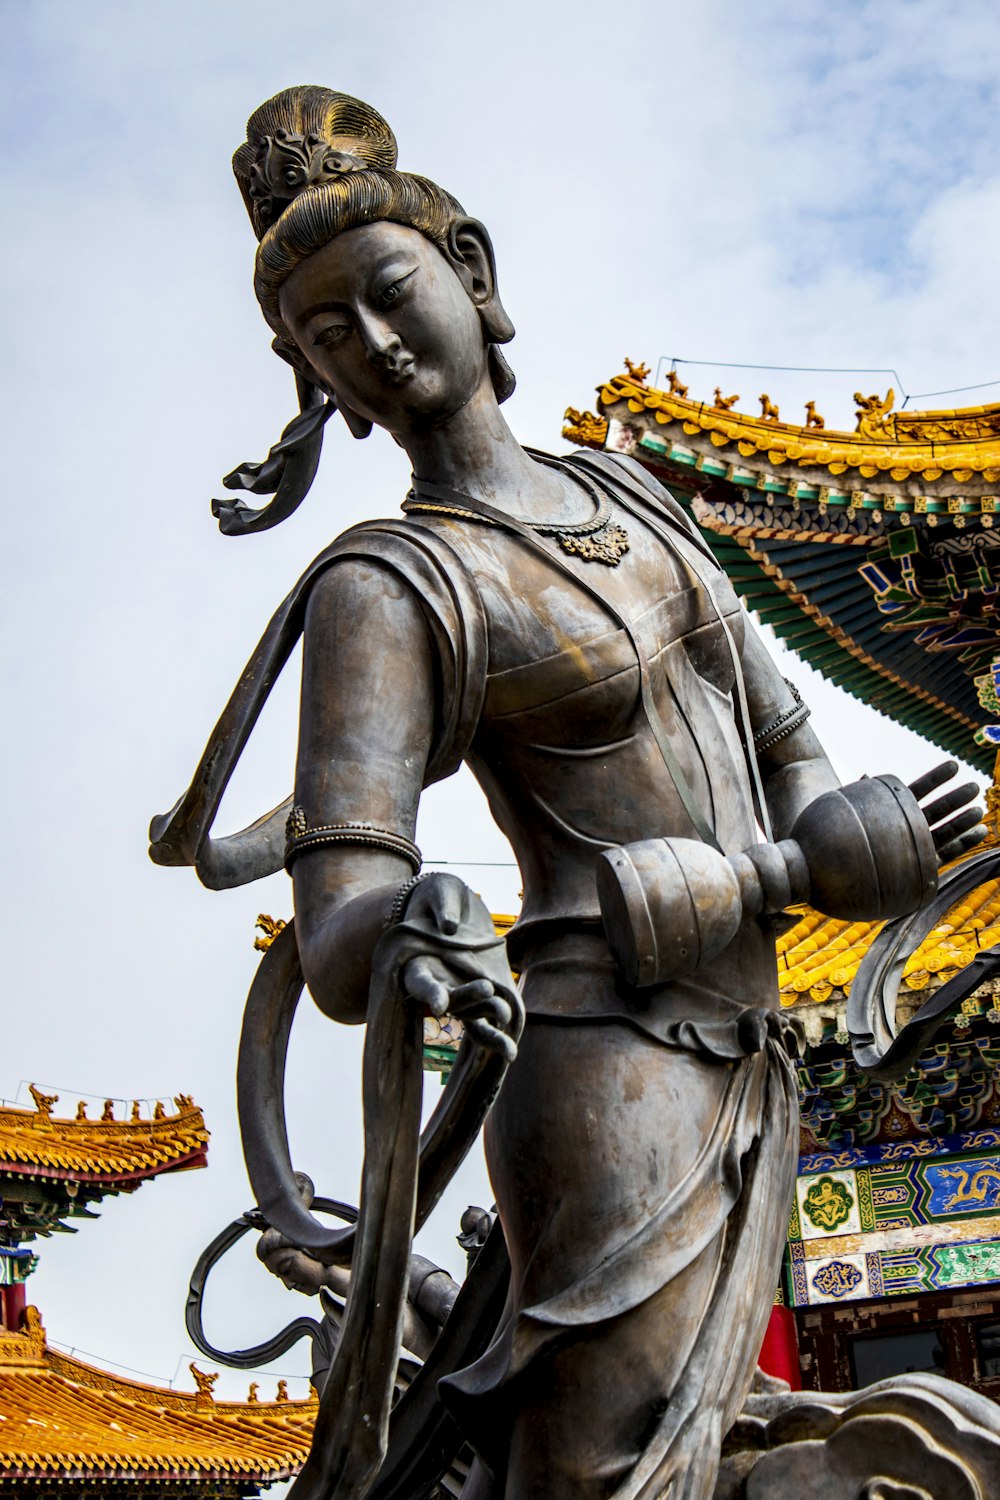 a statue of a person holding a sword